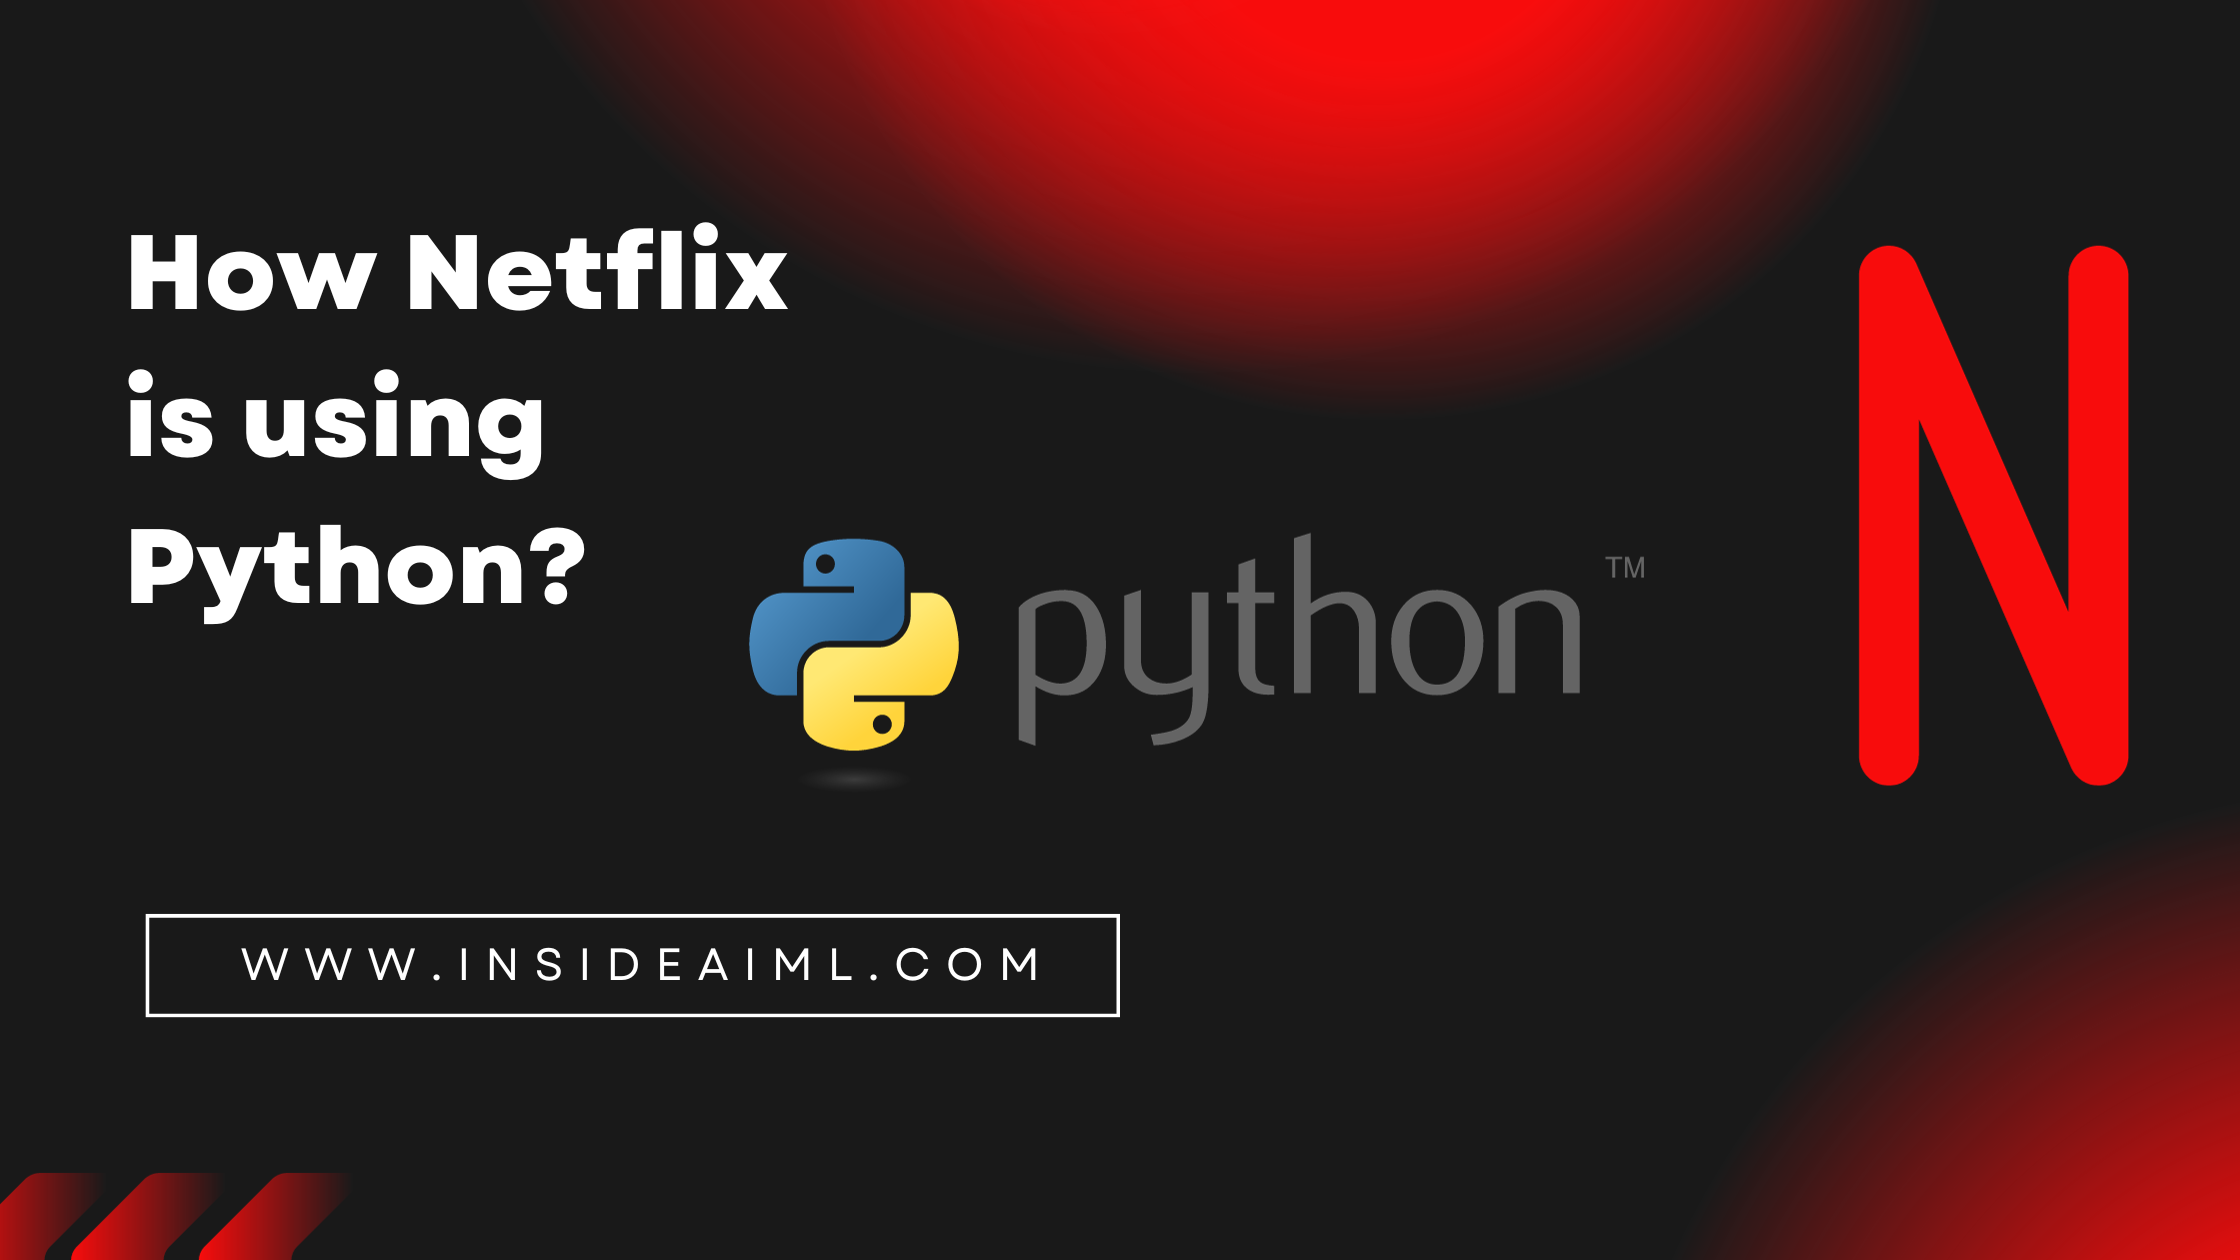 The Ultimate Guide to Becoming a Netflix Coding Expert